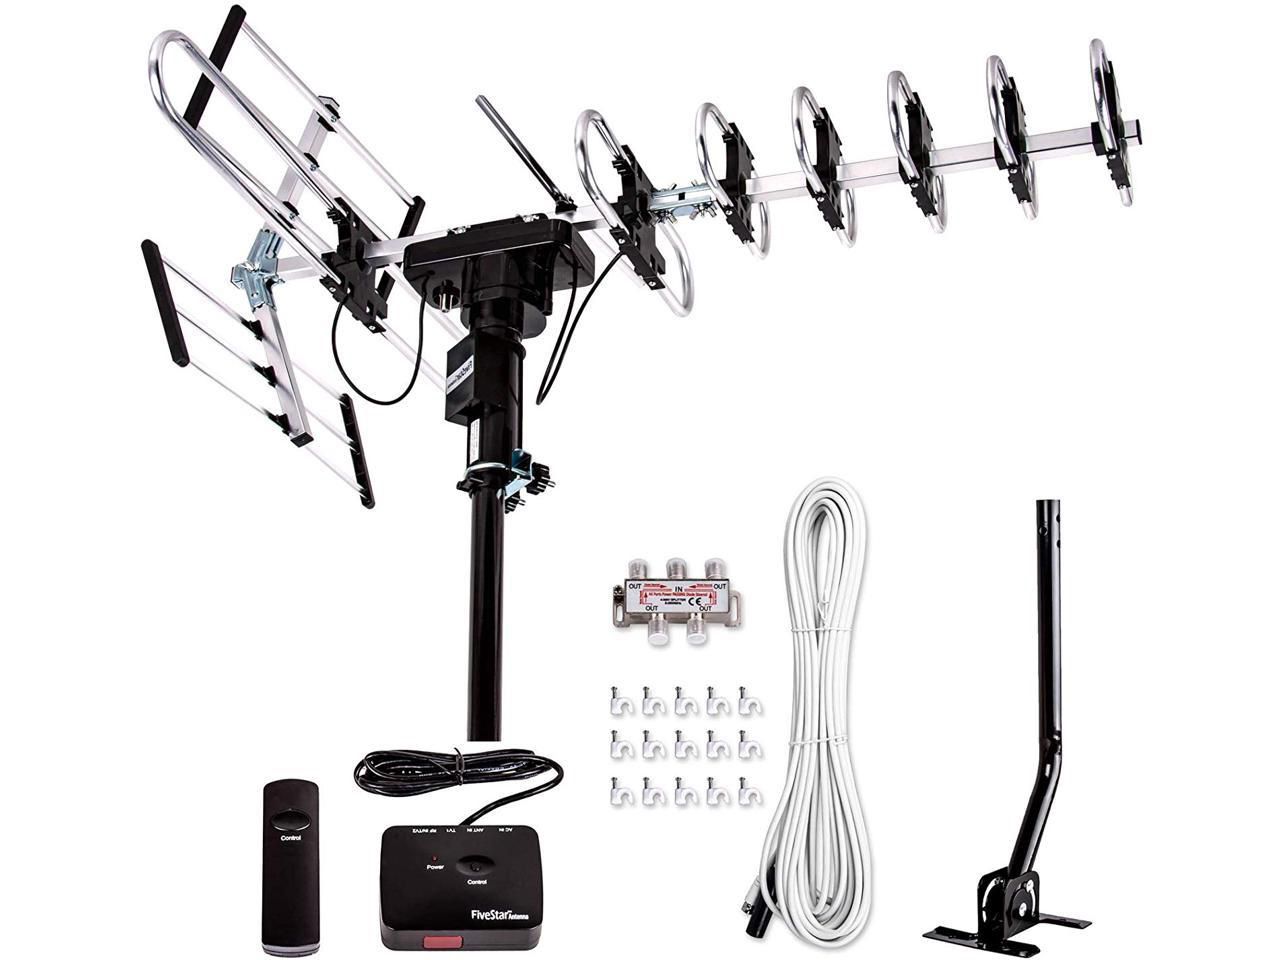 Outdoor HD TV Antenna Long Range with Motorized 360 Degree Rotation, UHF/VHF/FM Radio with Infrared Remote Control with Installation Kit and Pole